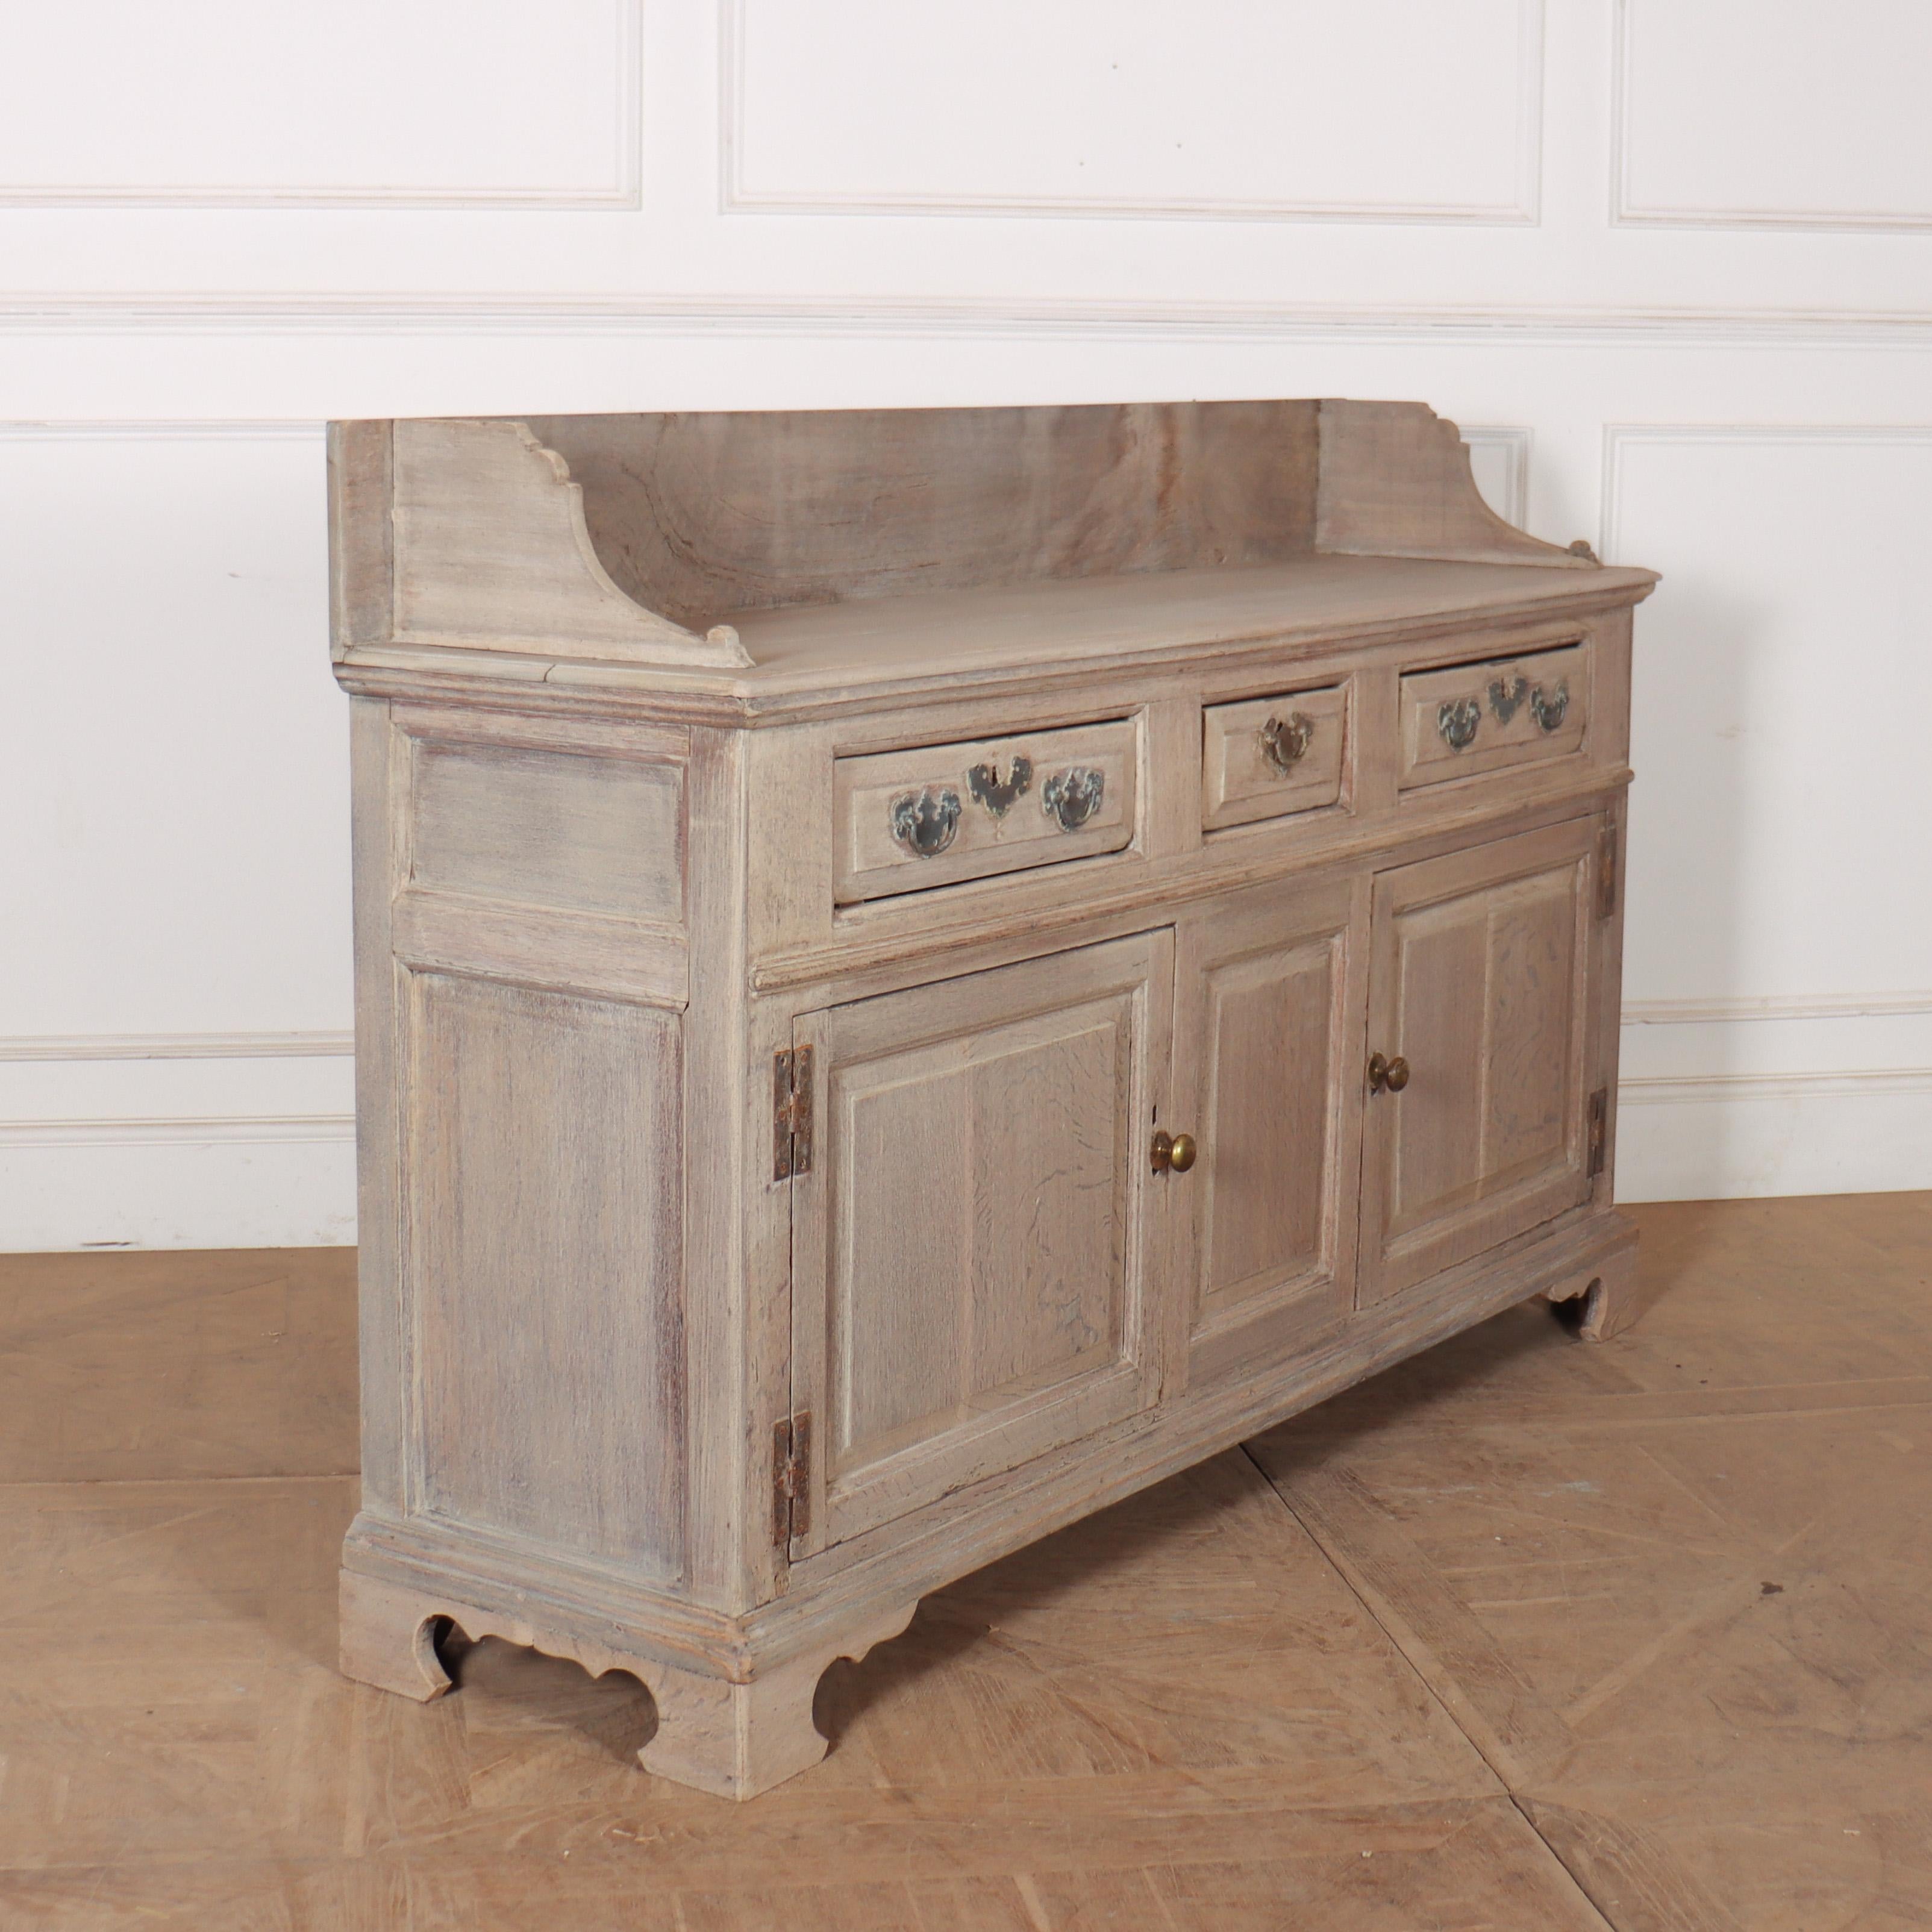 18th Century Bleached Oak Dresser Base In Good Condition For Sale In Leamington Spa, Warwickshire